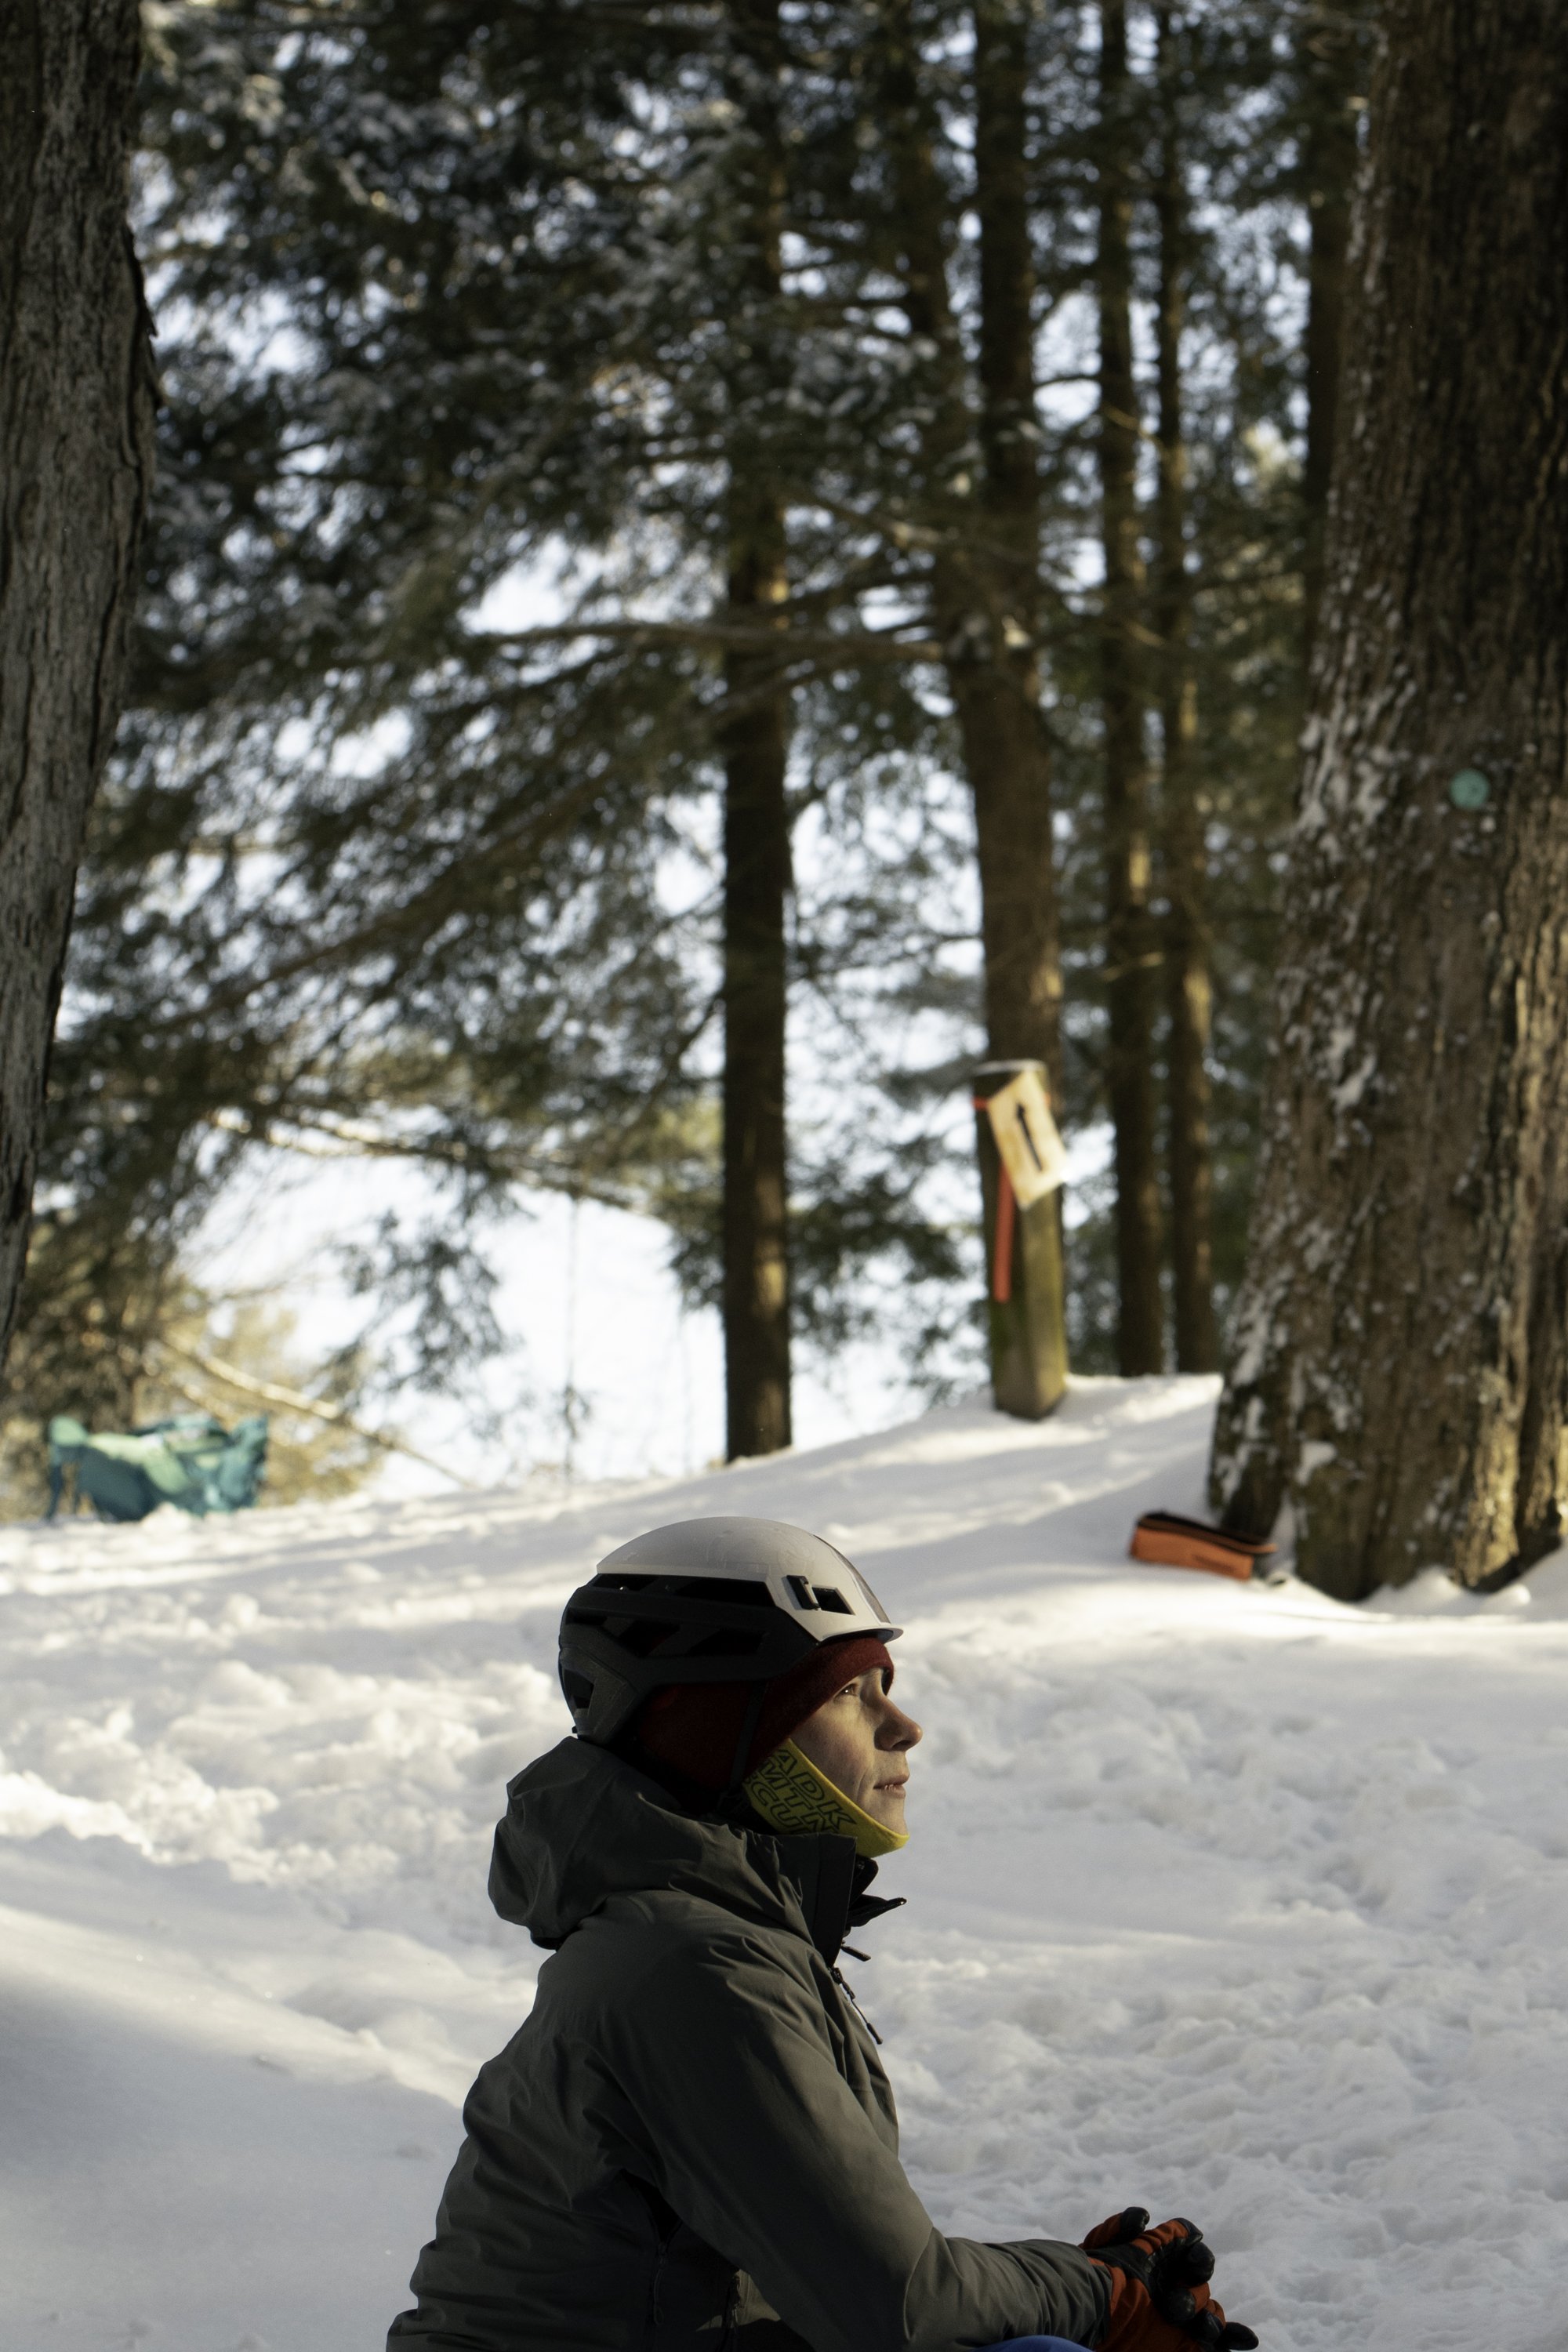  Tyler Patno, a member of Adirondack Mountain Rescue (AMR) pauses during an ice axe and crampon course in Saratoga State Park in Saratoga Springs, N.Y. on February 5, 2022.  